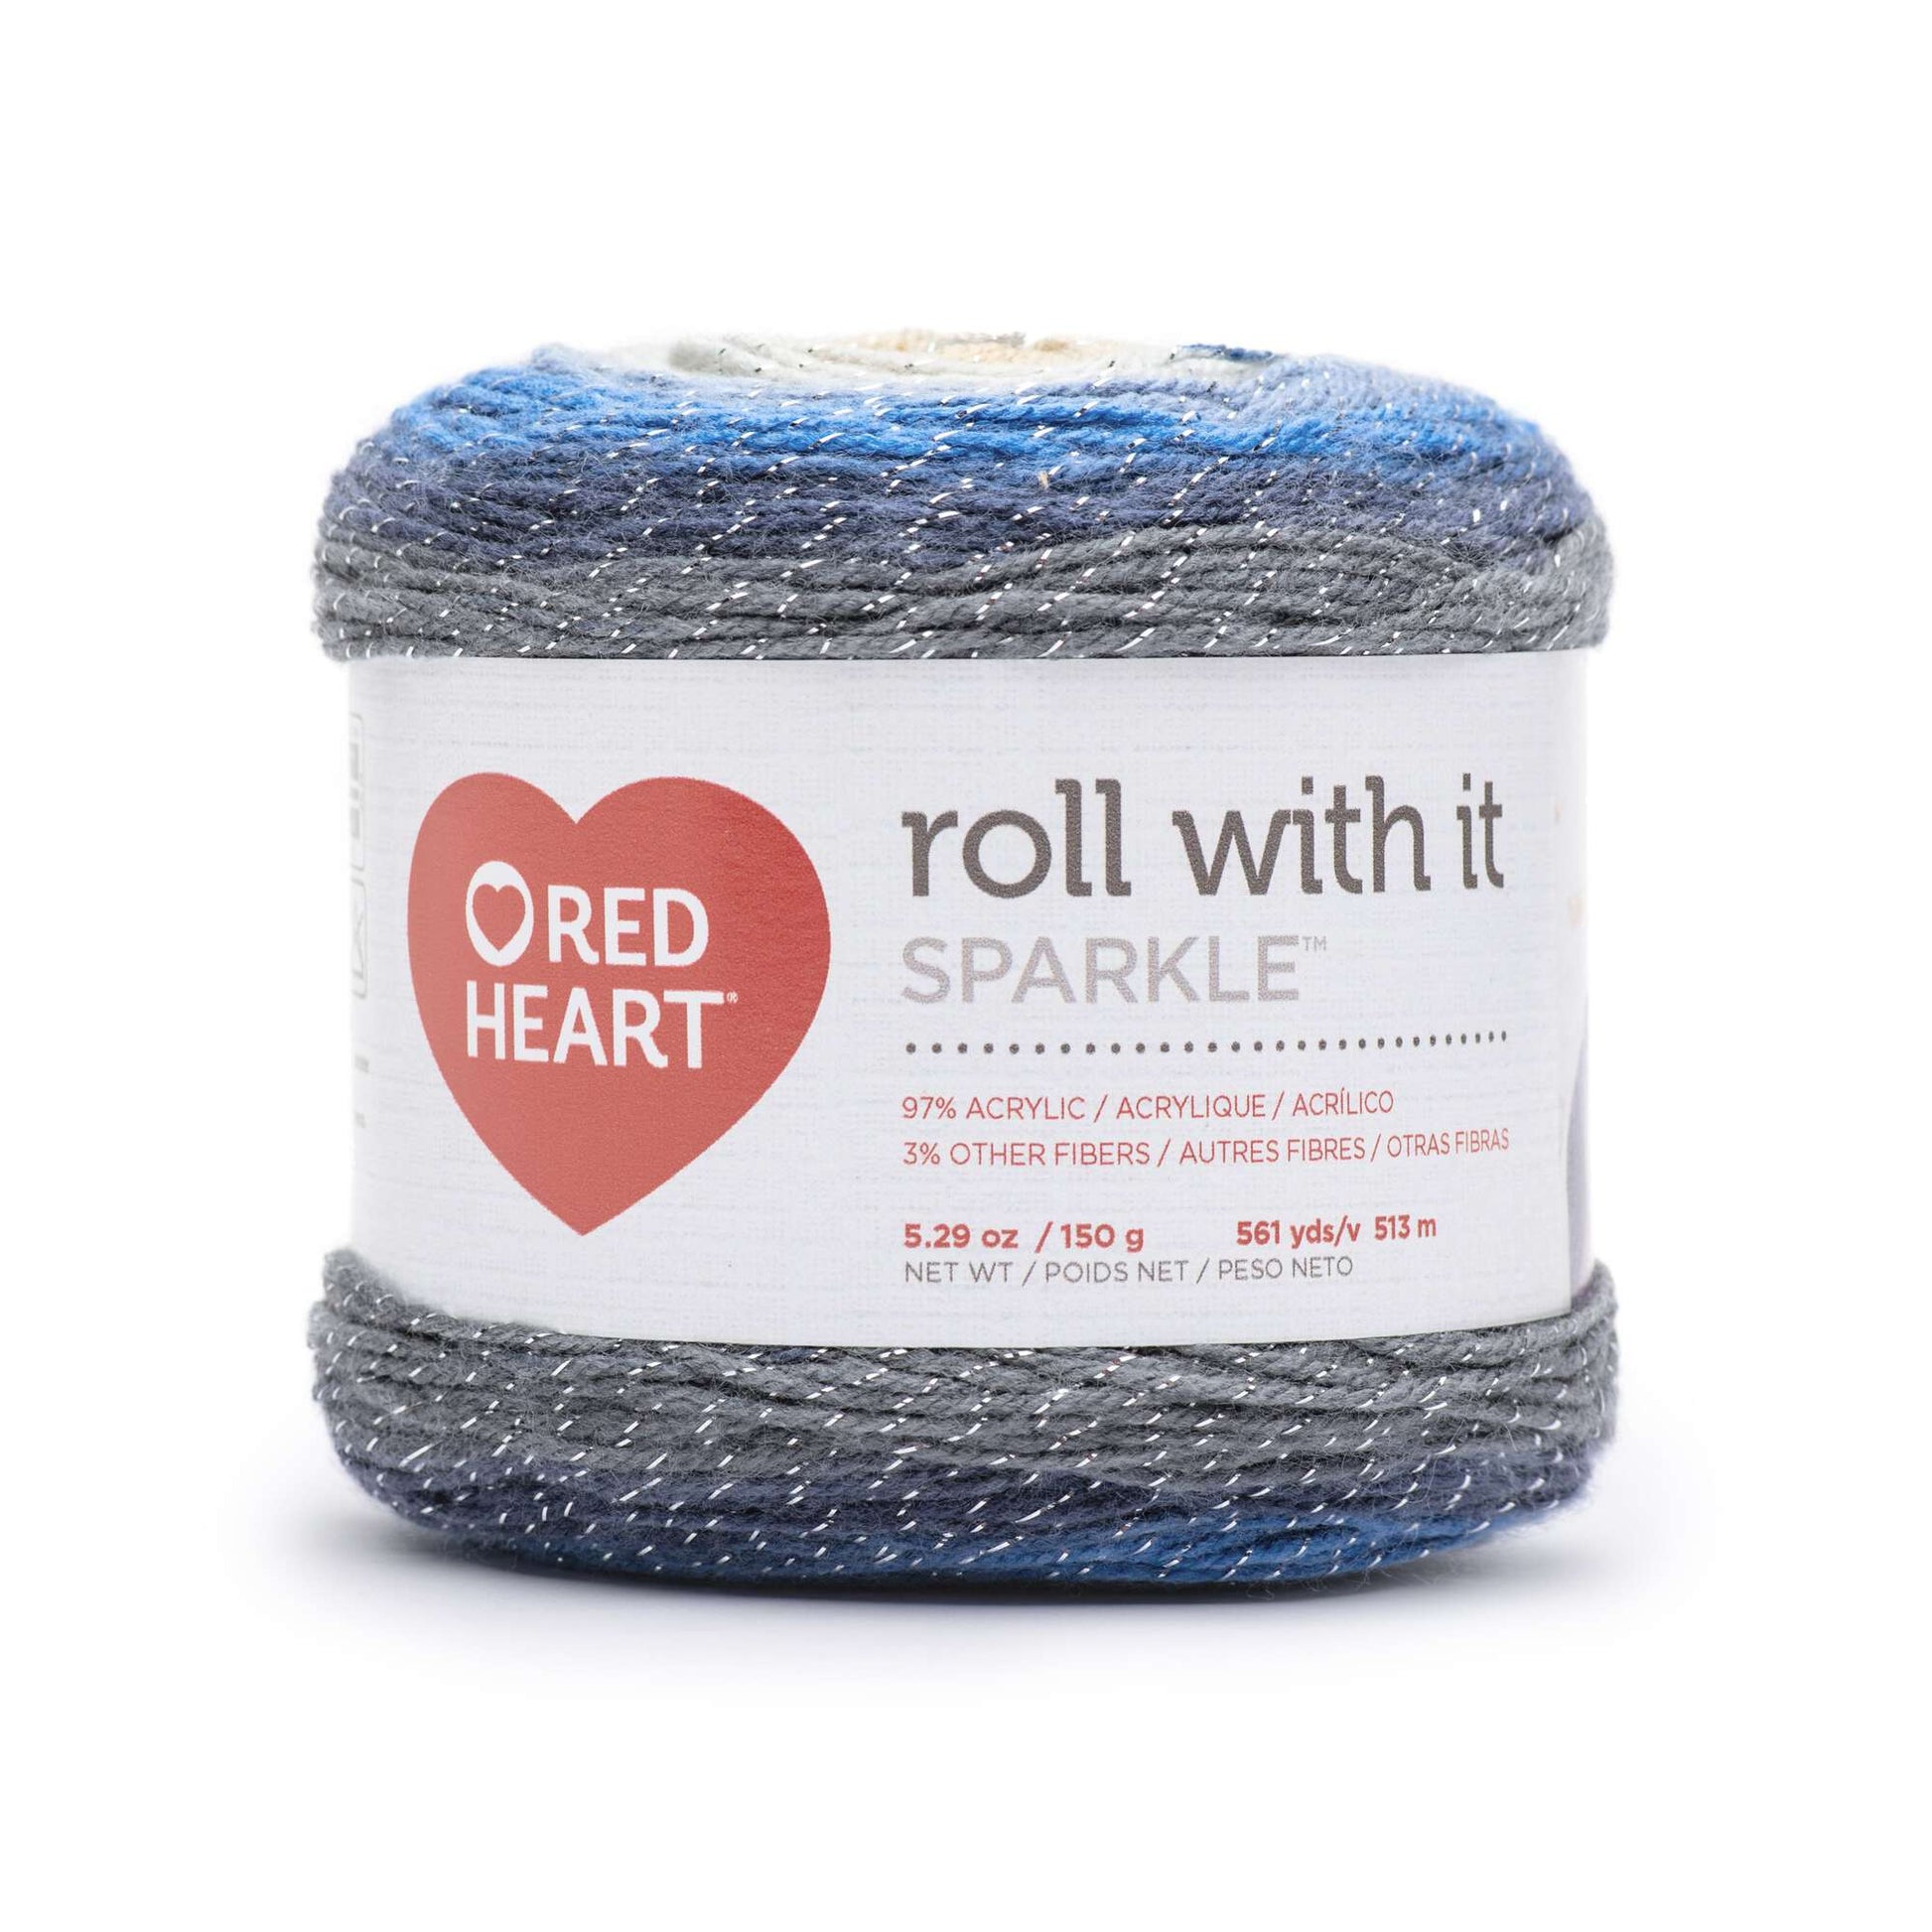 Red Heart Roll With It Sparkle Yarn - Clearance shades